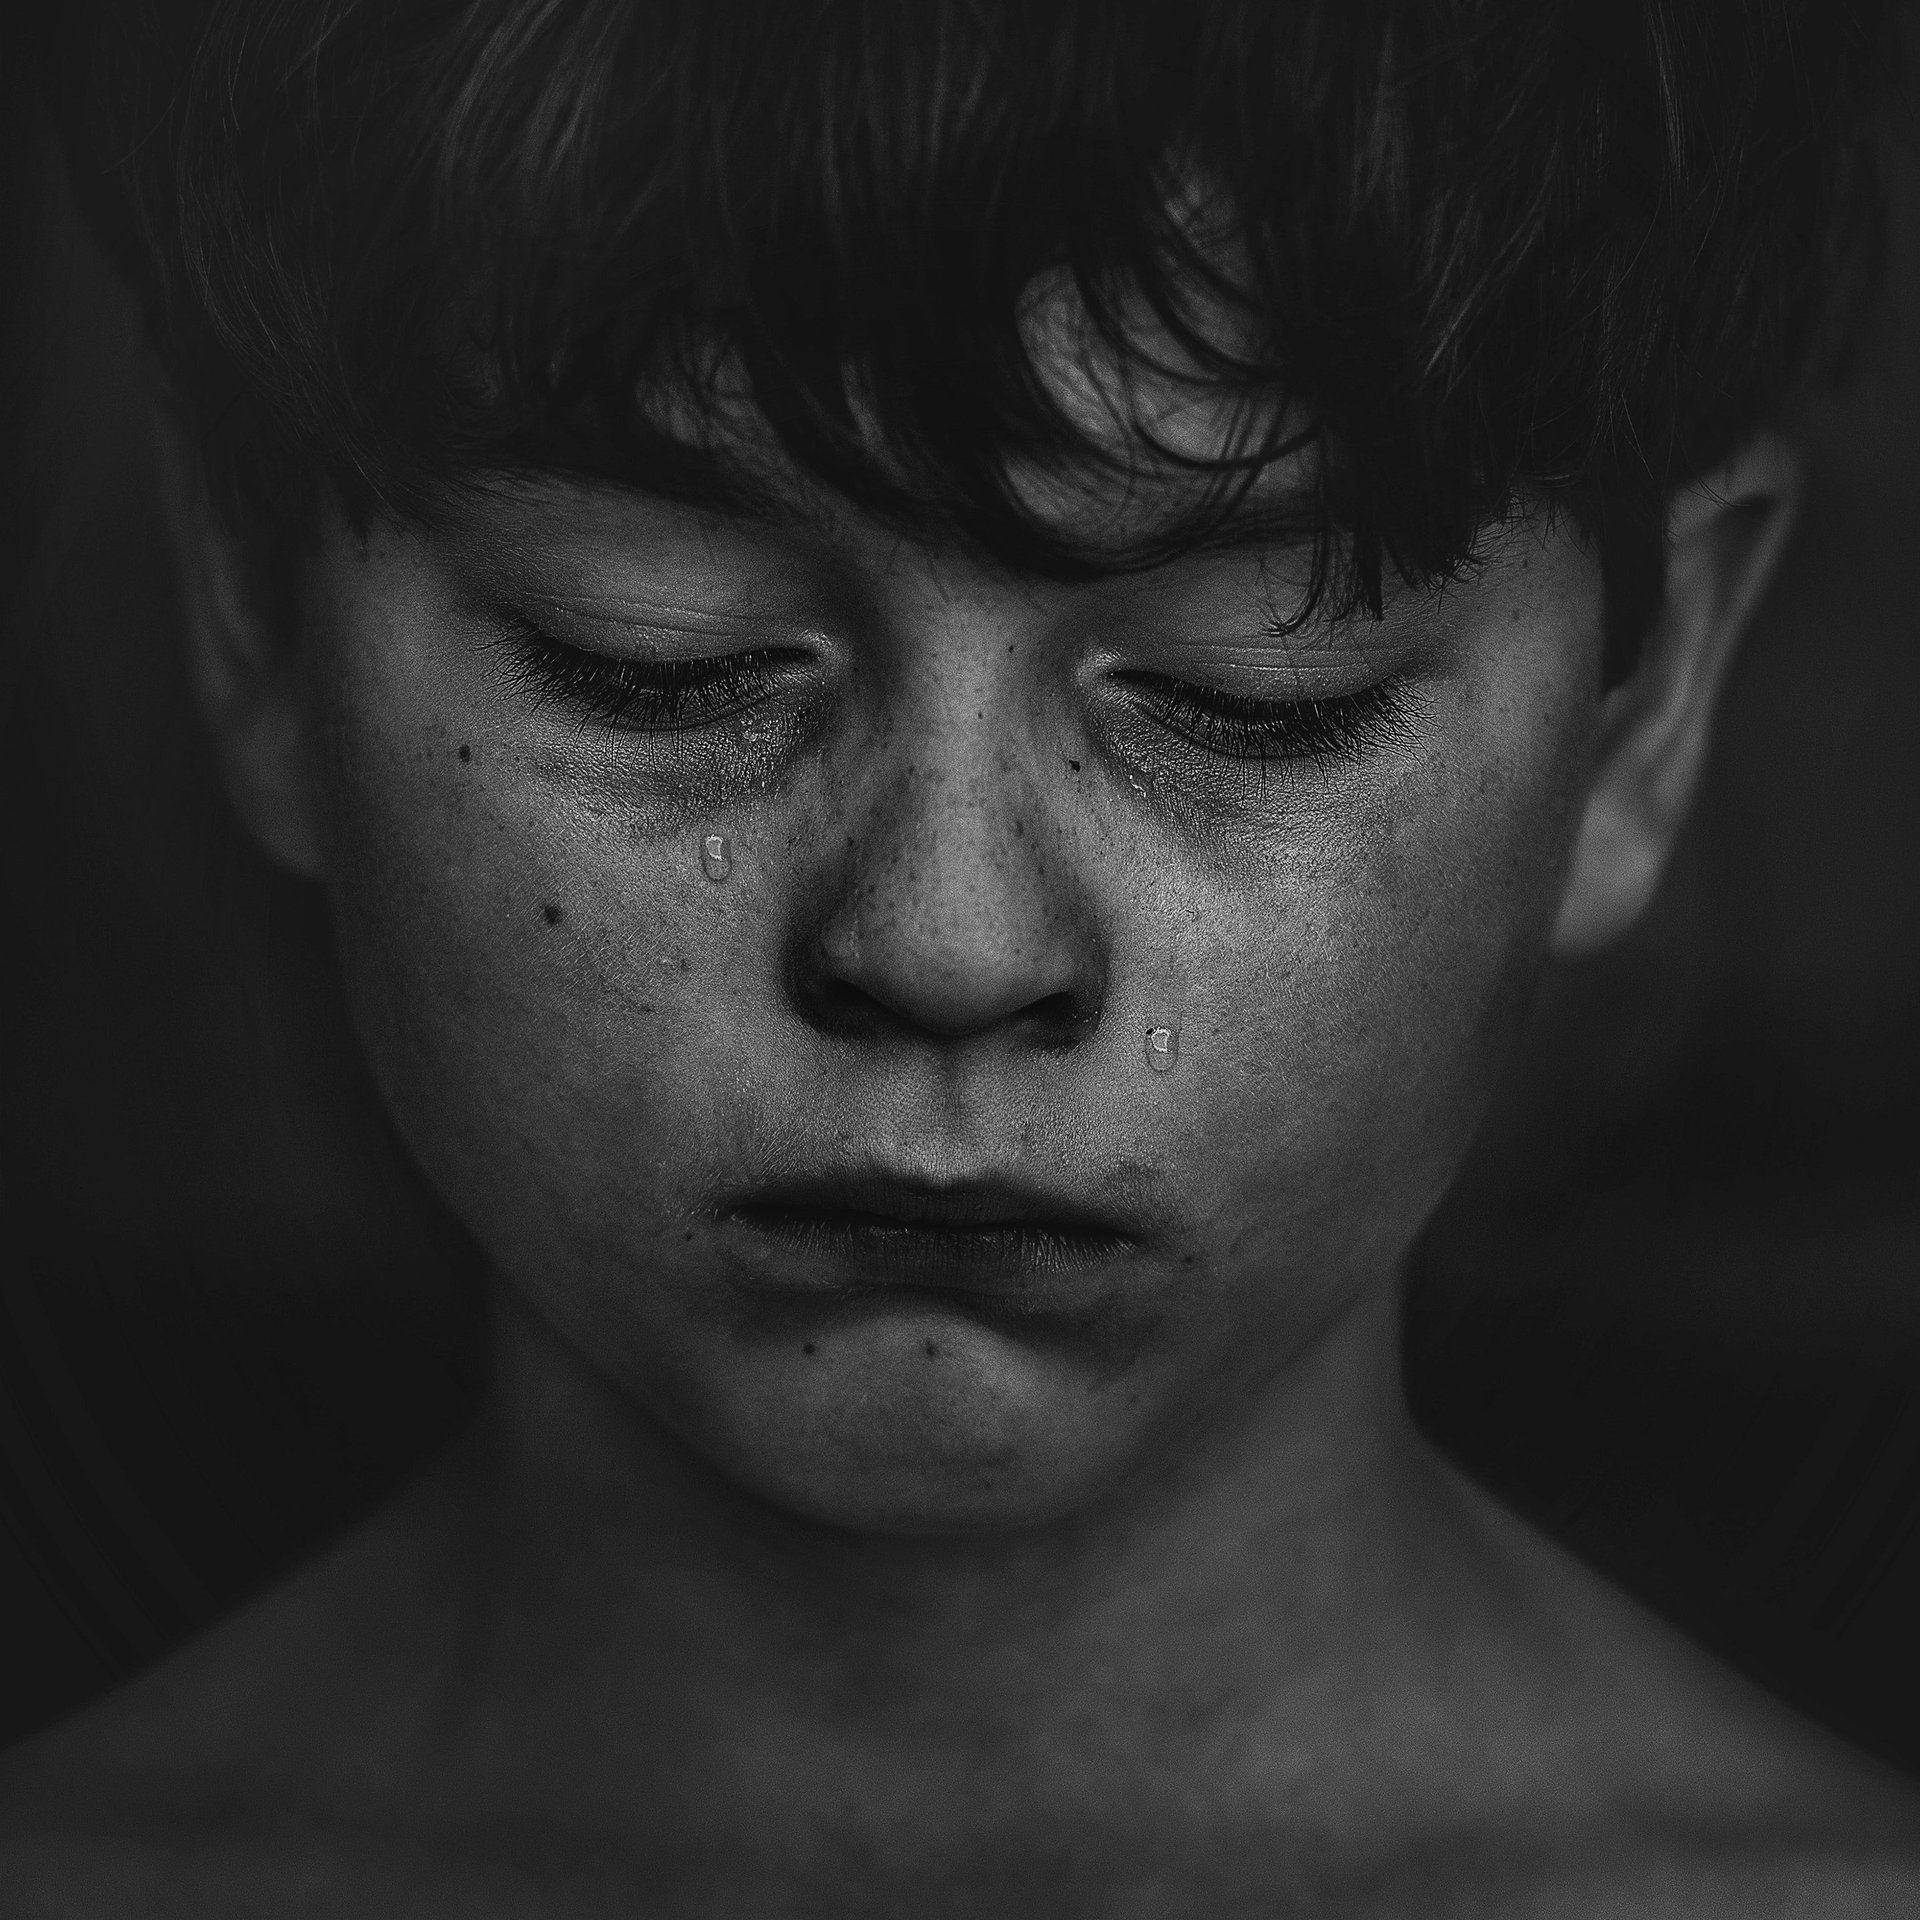 Sad boys' face with tears reminds us of inner pain